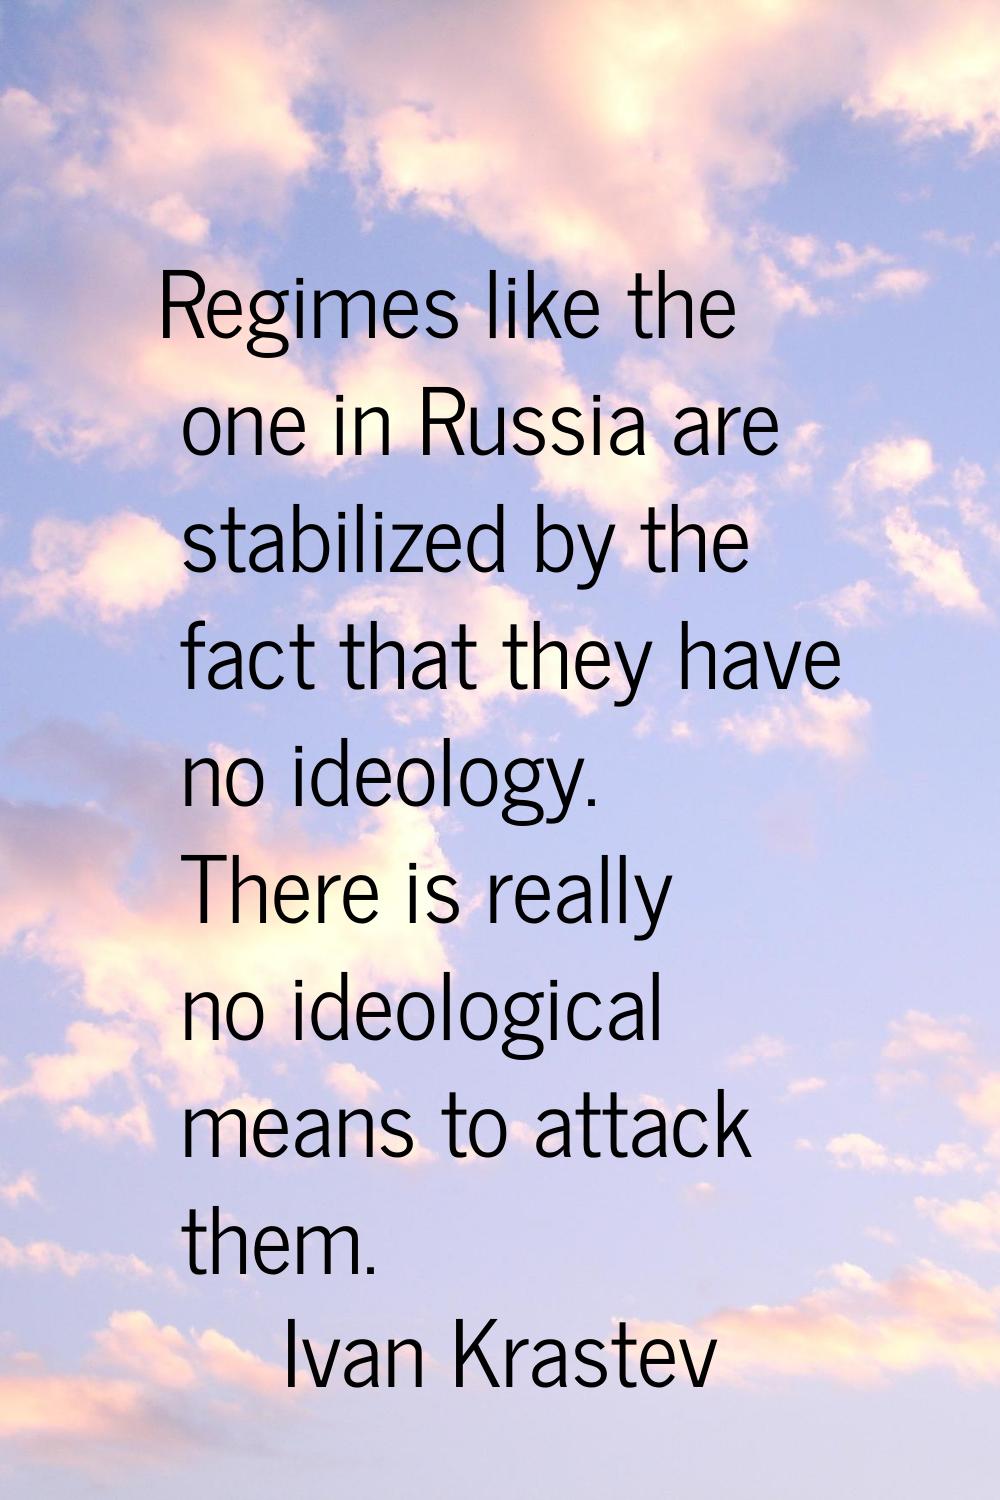 Regimes like the one in Russia are stabilized by the fact that they have no ideology. There is real